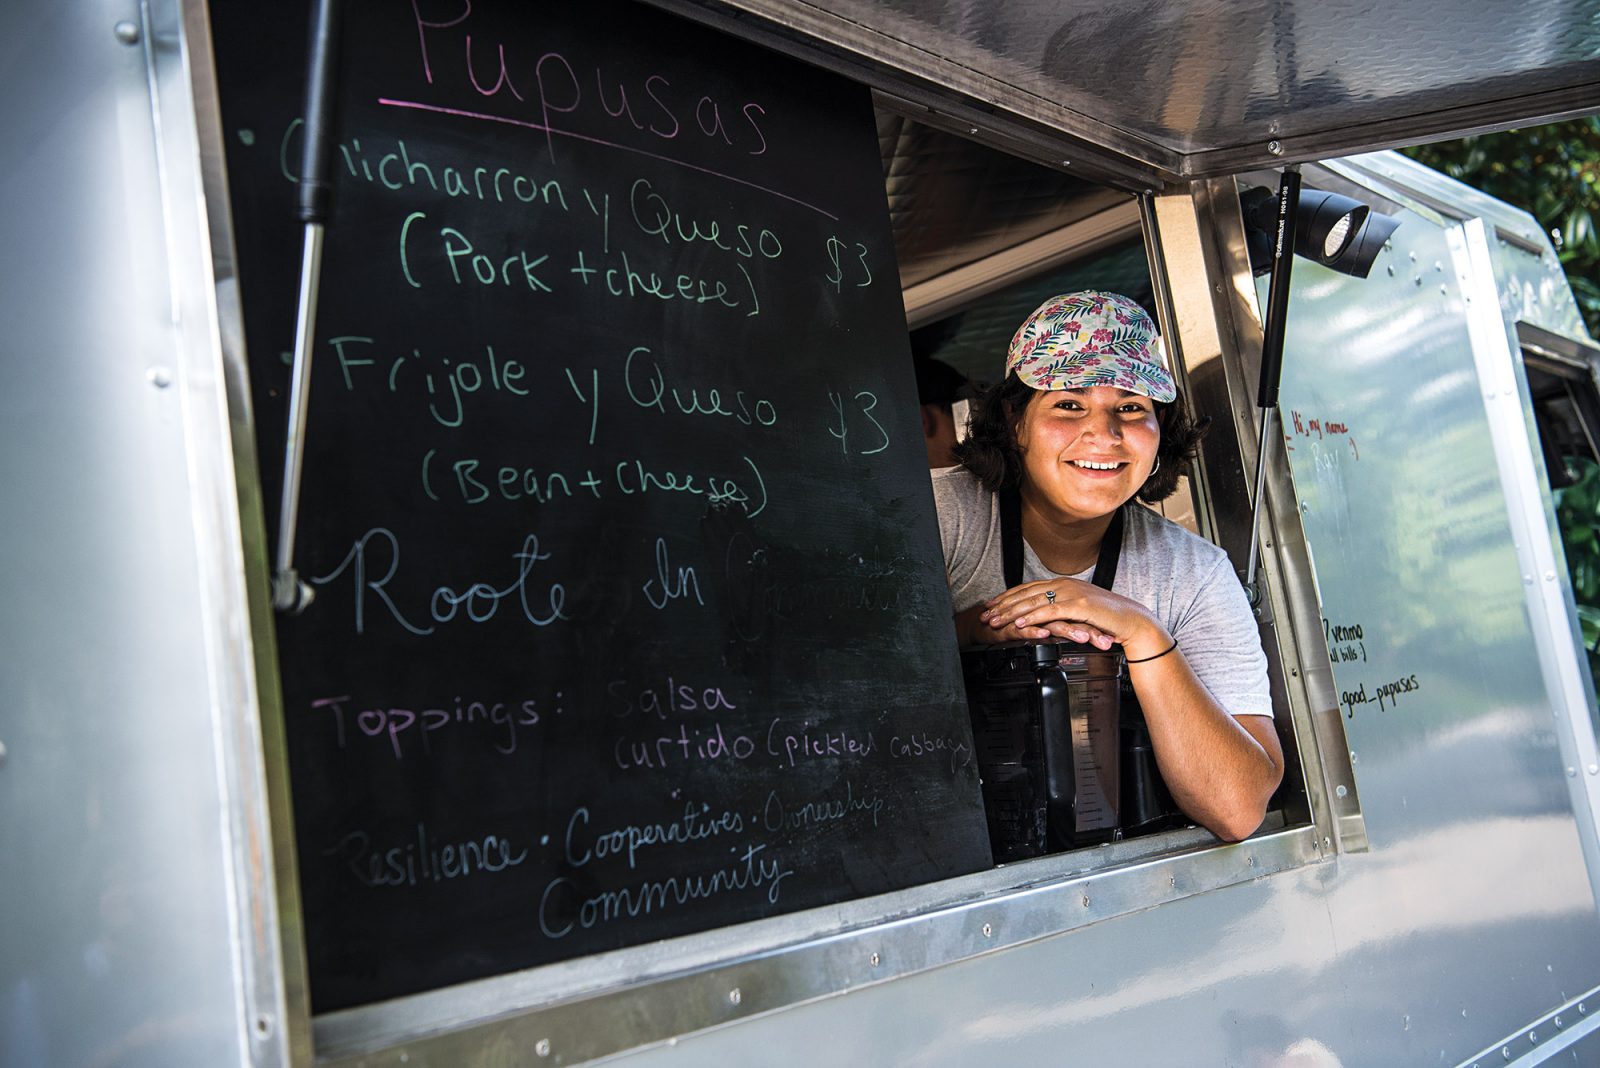 Cecilia Polanco '16 with her So Good Pupusas food truck on July 26, 2017. (Photo by Grant Halverson '93)